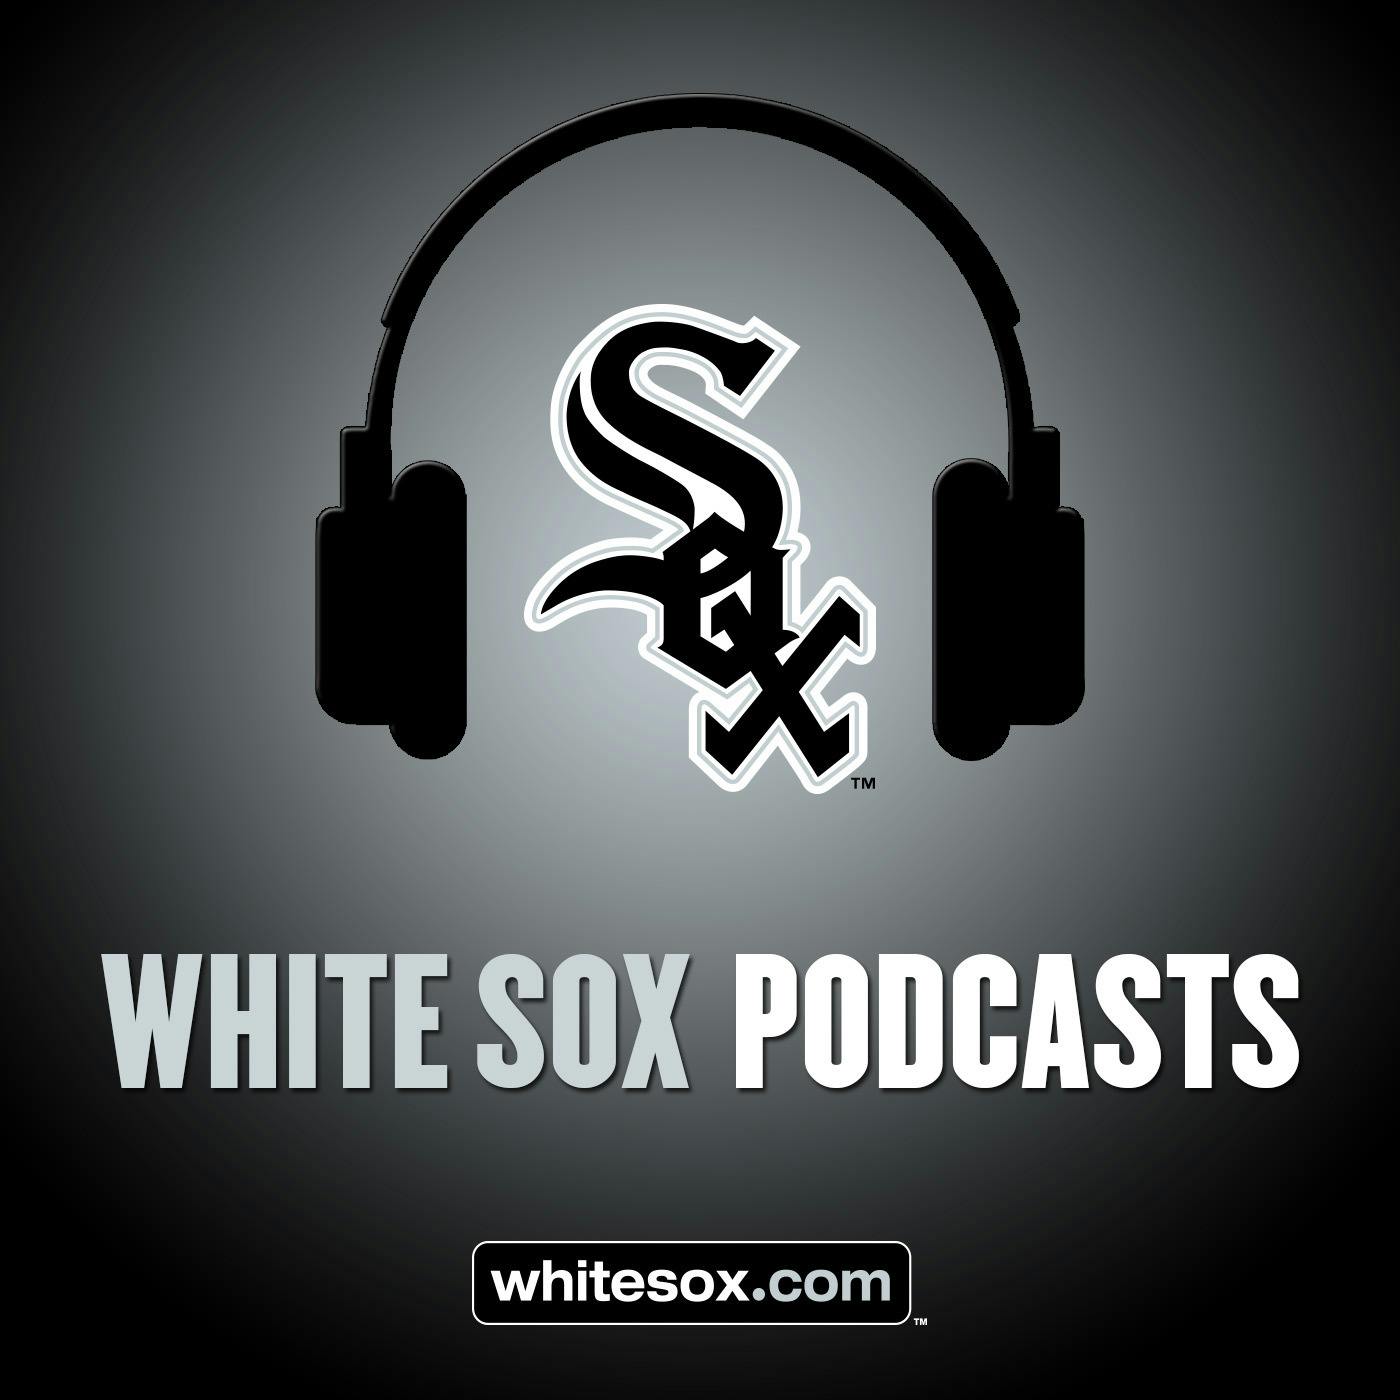 12/8/18: White Sox Weekly